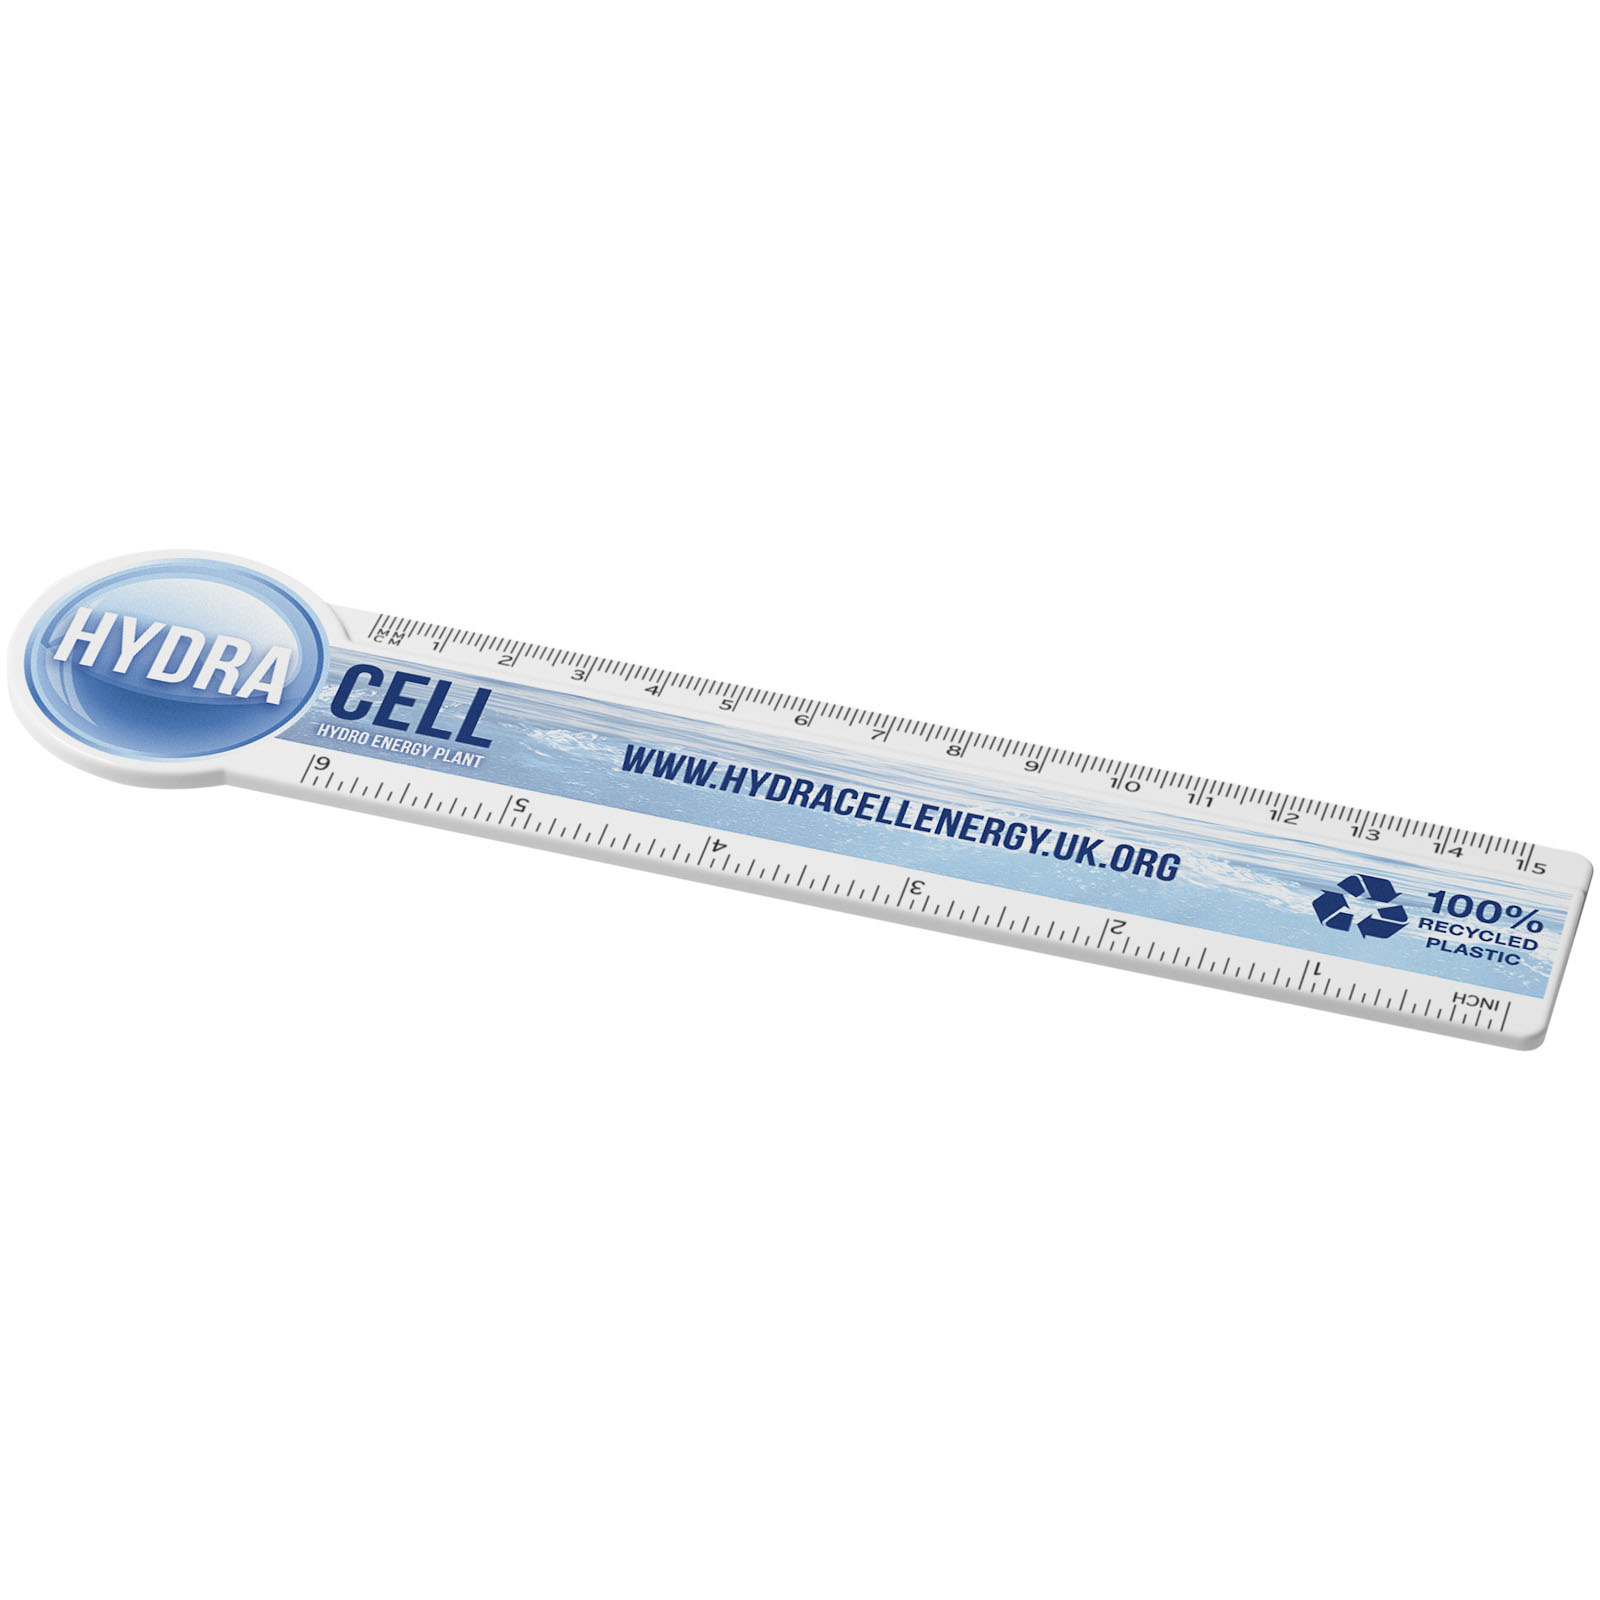 Advertising Desk Accessories - Tait 15 cm circle-shaped recycled plastic ruler  - 0